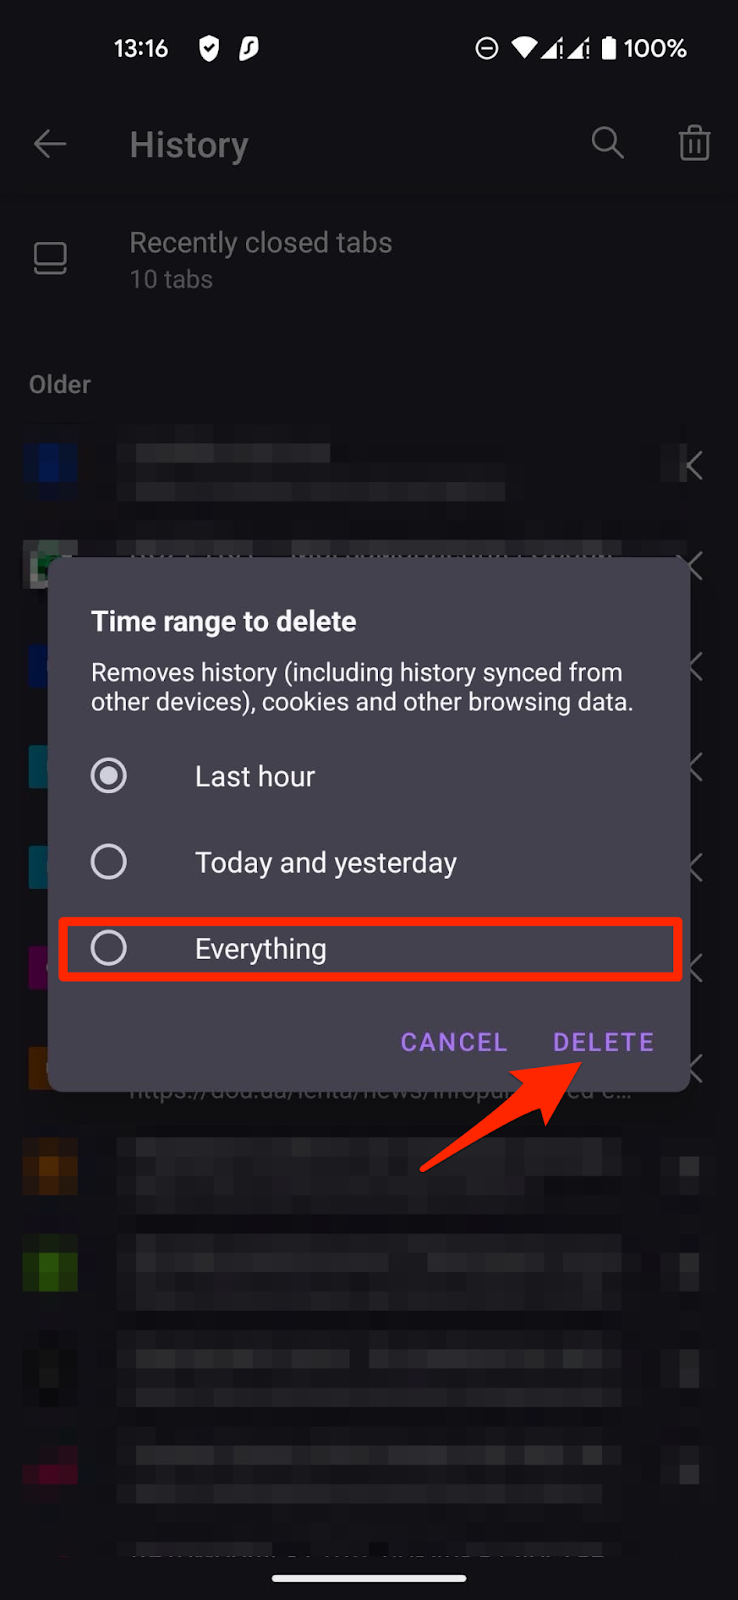 Choose the time range and tap the "Delete" button.